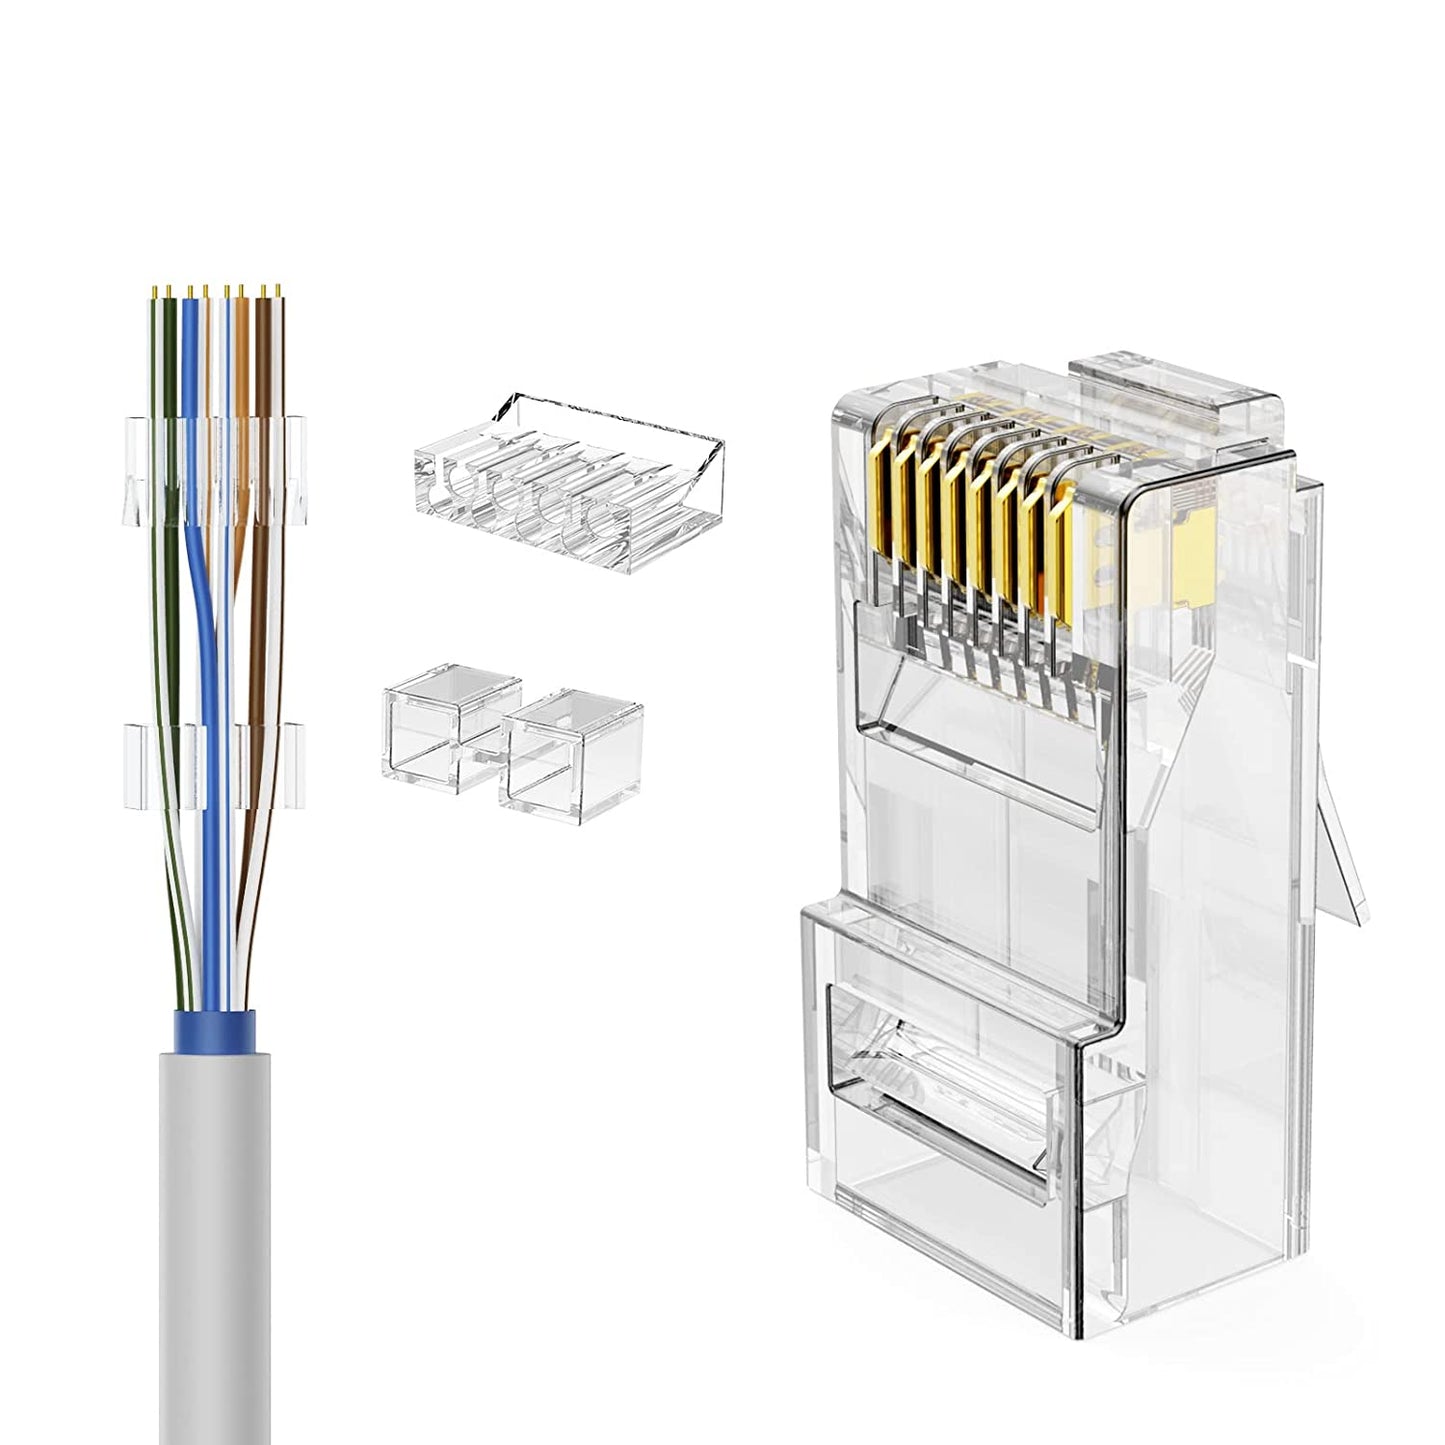 Vention IDGR0 / IDFR0 FTP / UTP CAT6A RJ45 100pcs Transparent Modular Wire Plug Connector with Metal Shielded Shell for Stable Transmission 100 Pieces